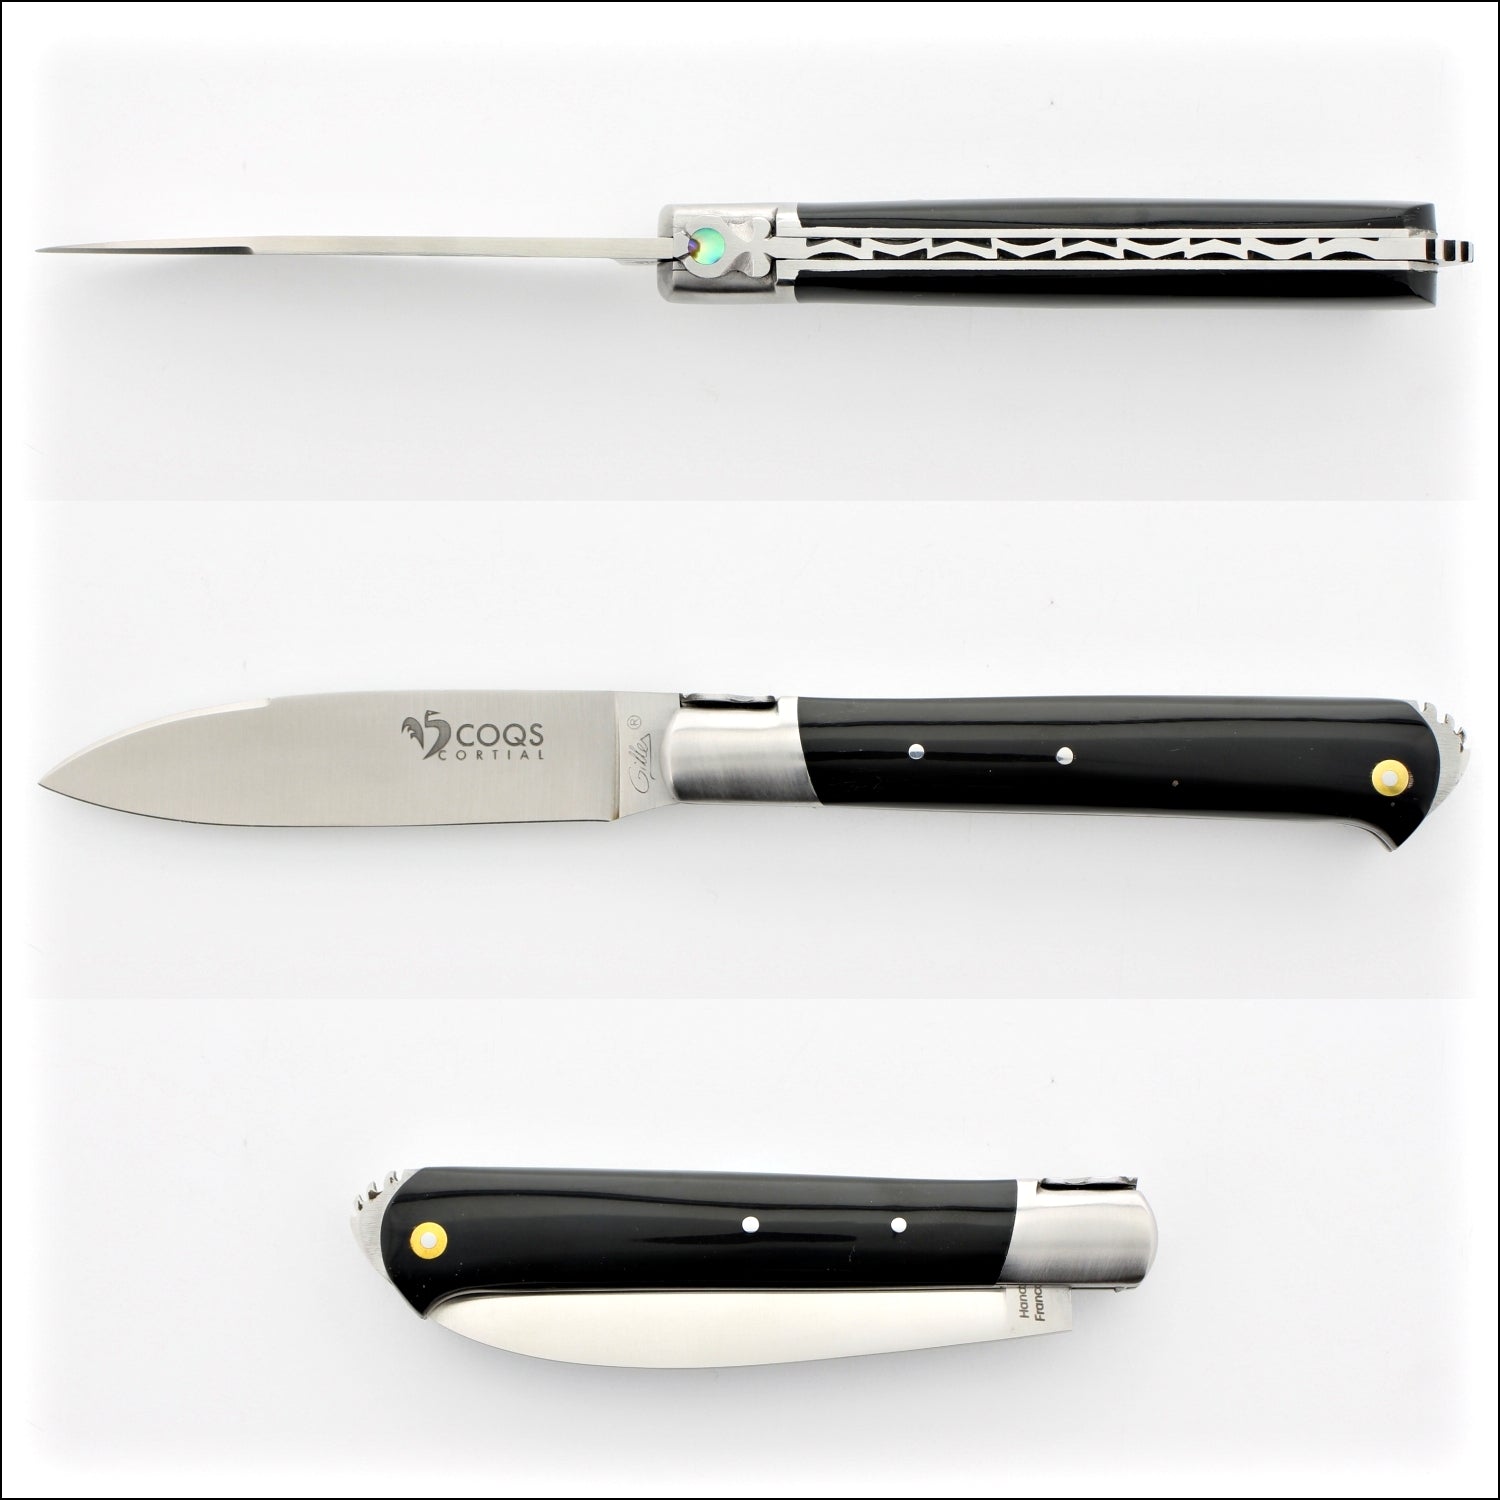 5 Coqs Pocket Knife - Black Horn Tip & Mother of Pearl Inlay